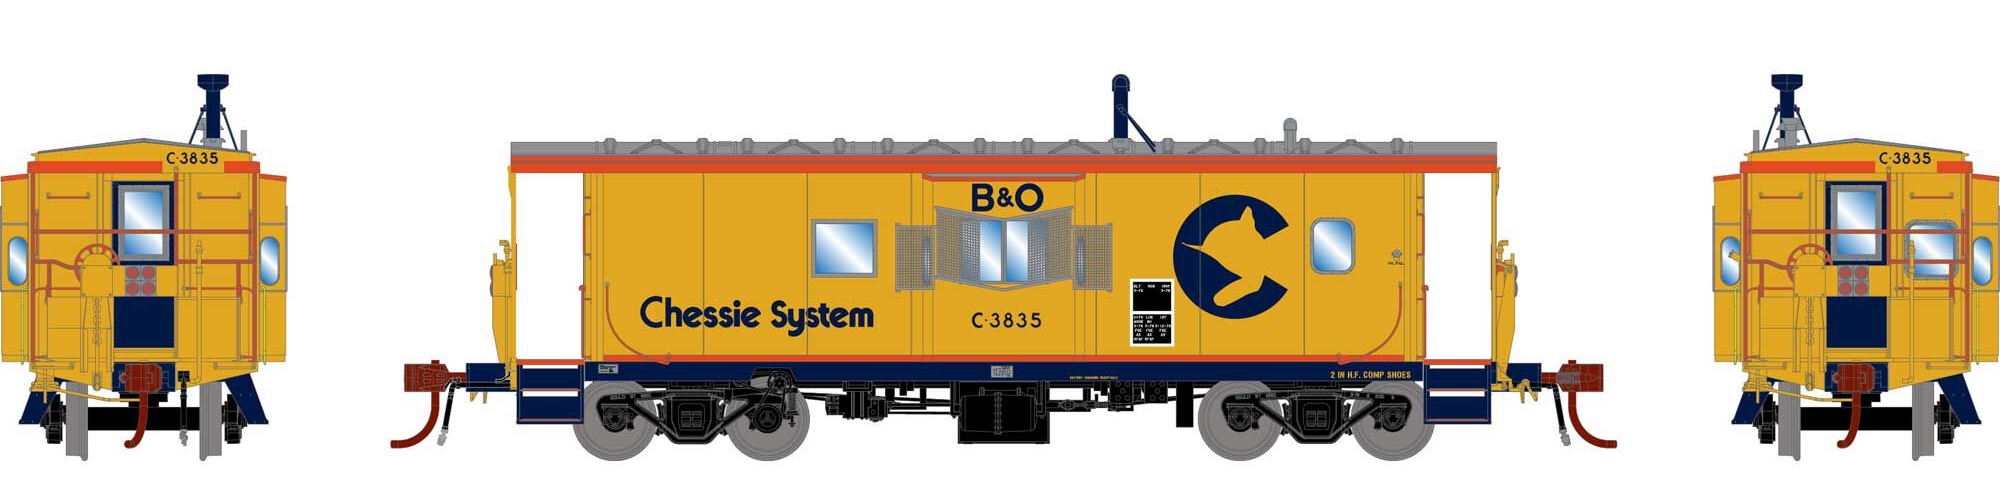 Athearn Genesis HO ATHG78347 DCC/Tsunami SoundCar Equipped C-26A ICC Caboose with Lights & Sound Chessie/B&O #C-3835